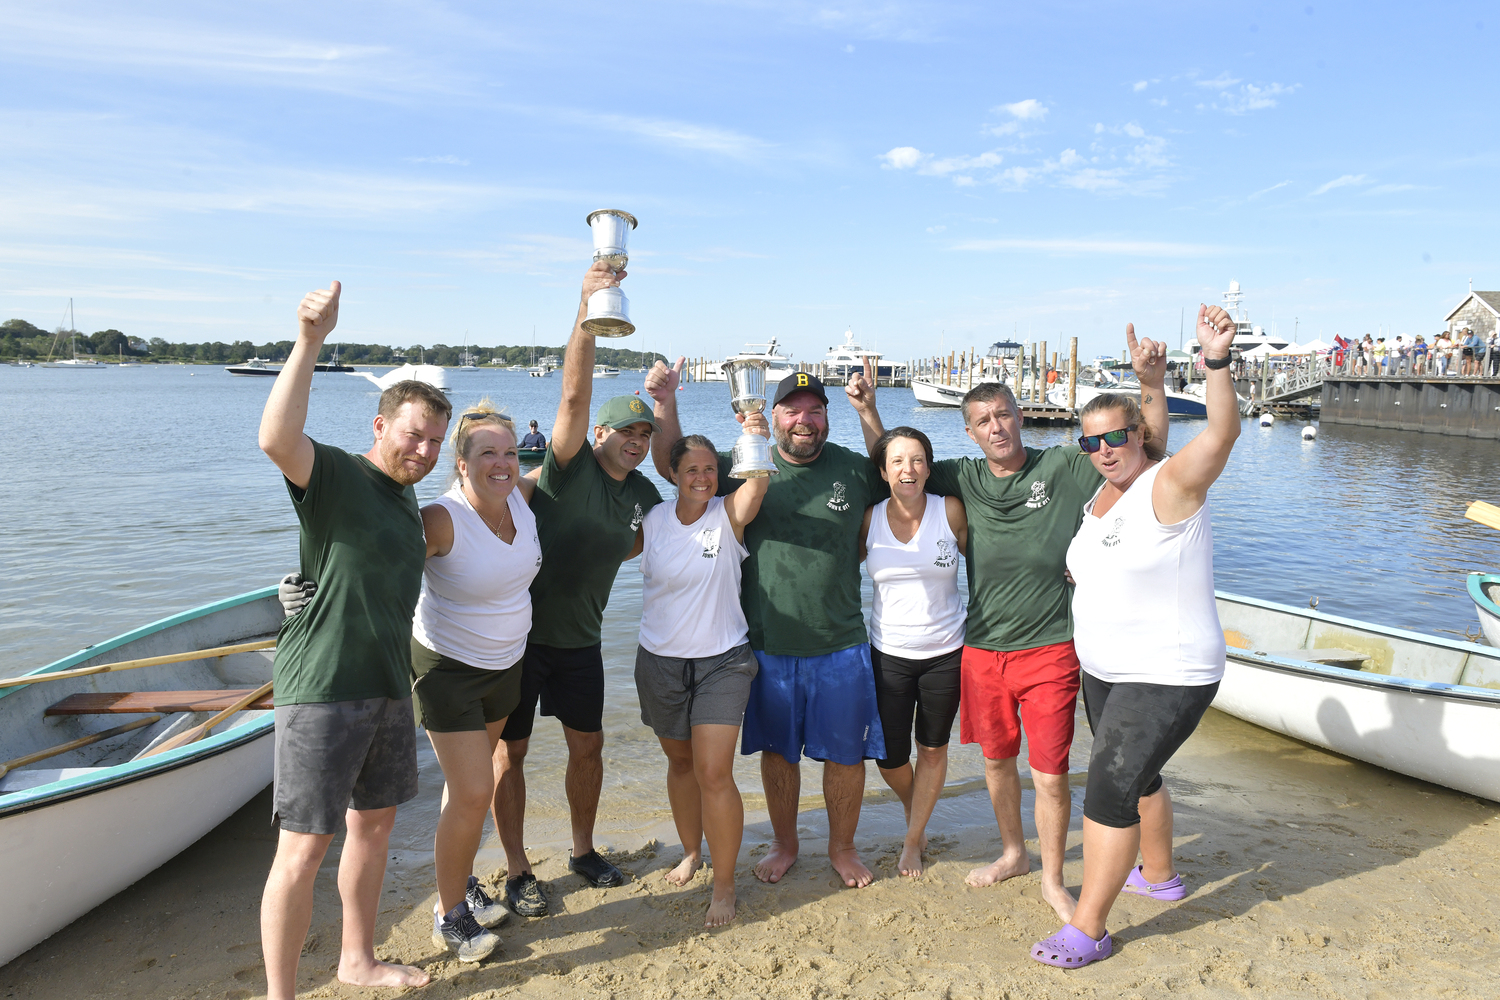 The John K. Ott Men's and Women's Teams swept the Whaleboat Races at HarborFest on Sunday. Left to right are John Cottrell, Shawn Mitchell, Gene Garypie, Shelly Cottrell, Mike Daniels, Karin Schroeder, Dave Schroeder and Robyn Mott.  DANA SHAW